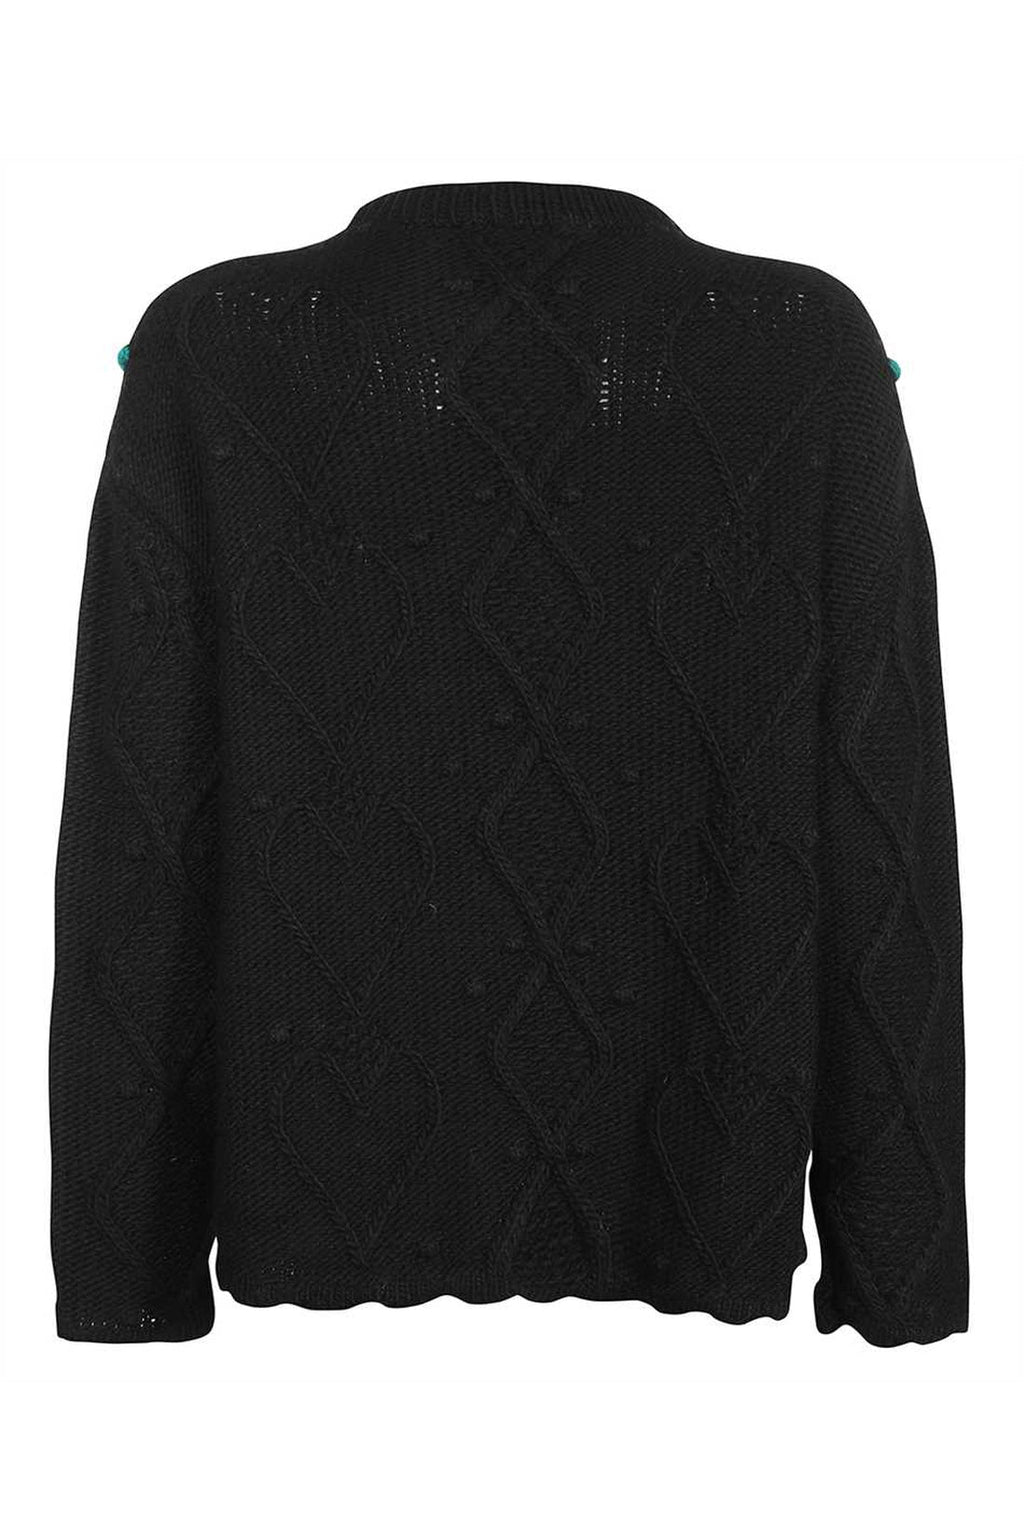 GCDS-OUTLET-SALE-Puffy long sleeve crew-neck sweater-ARCHIVIST